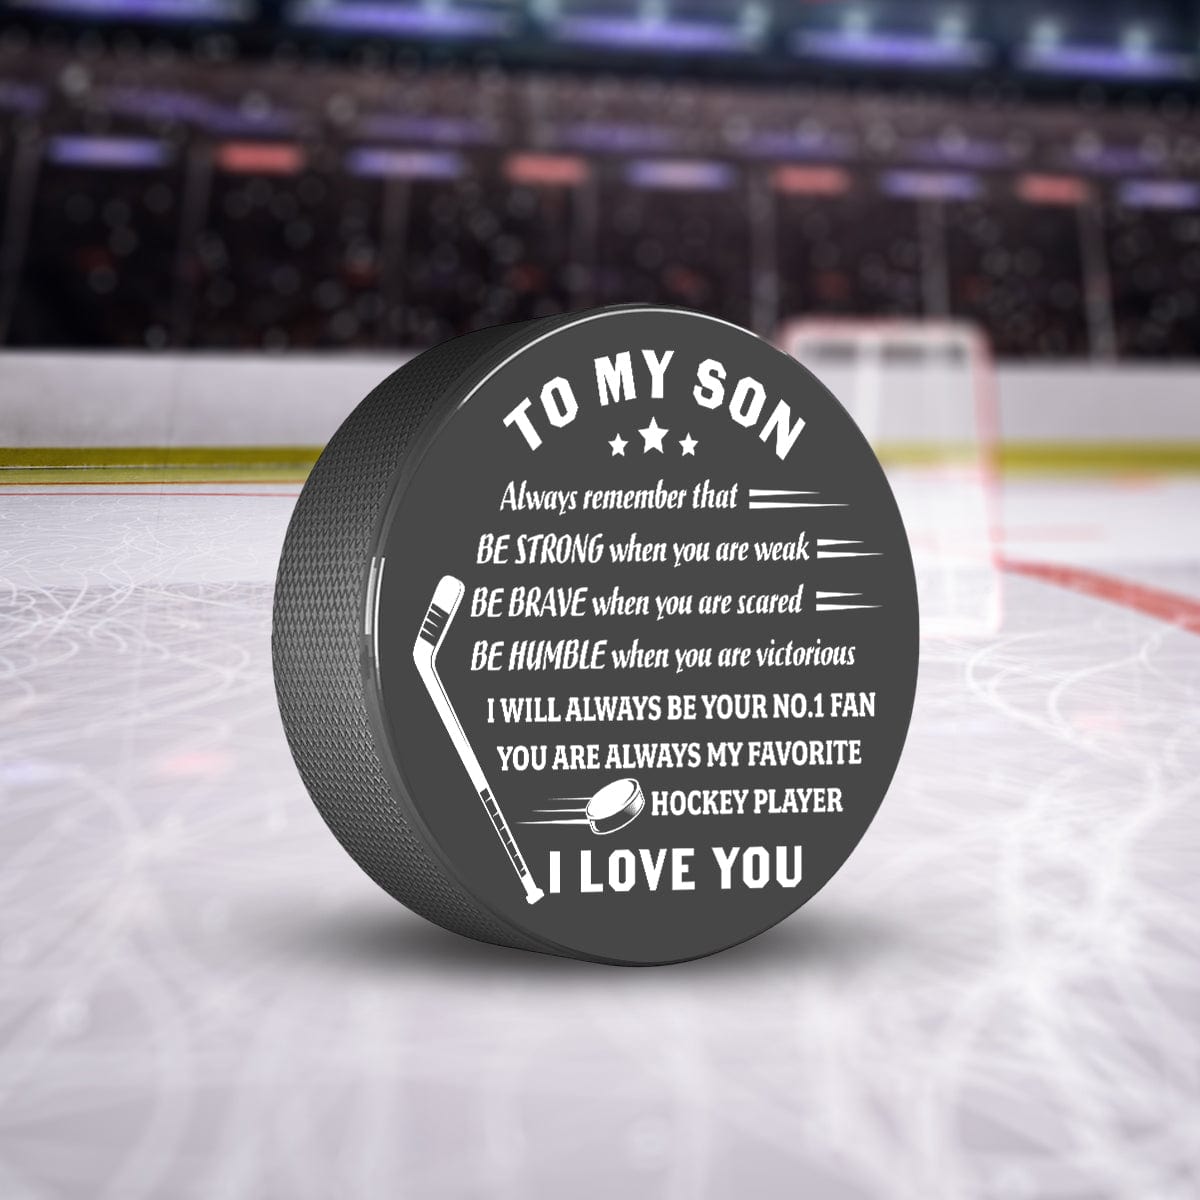 Hockey Puck - Hockey - To My Son - Be Humble When You Are Victorious - Gai16021